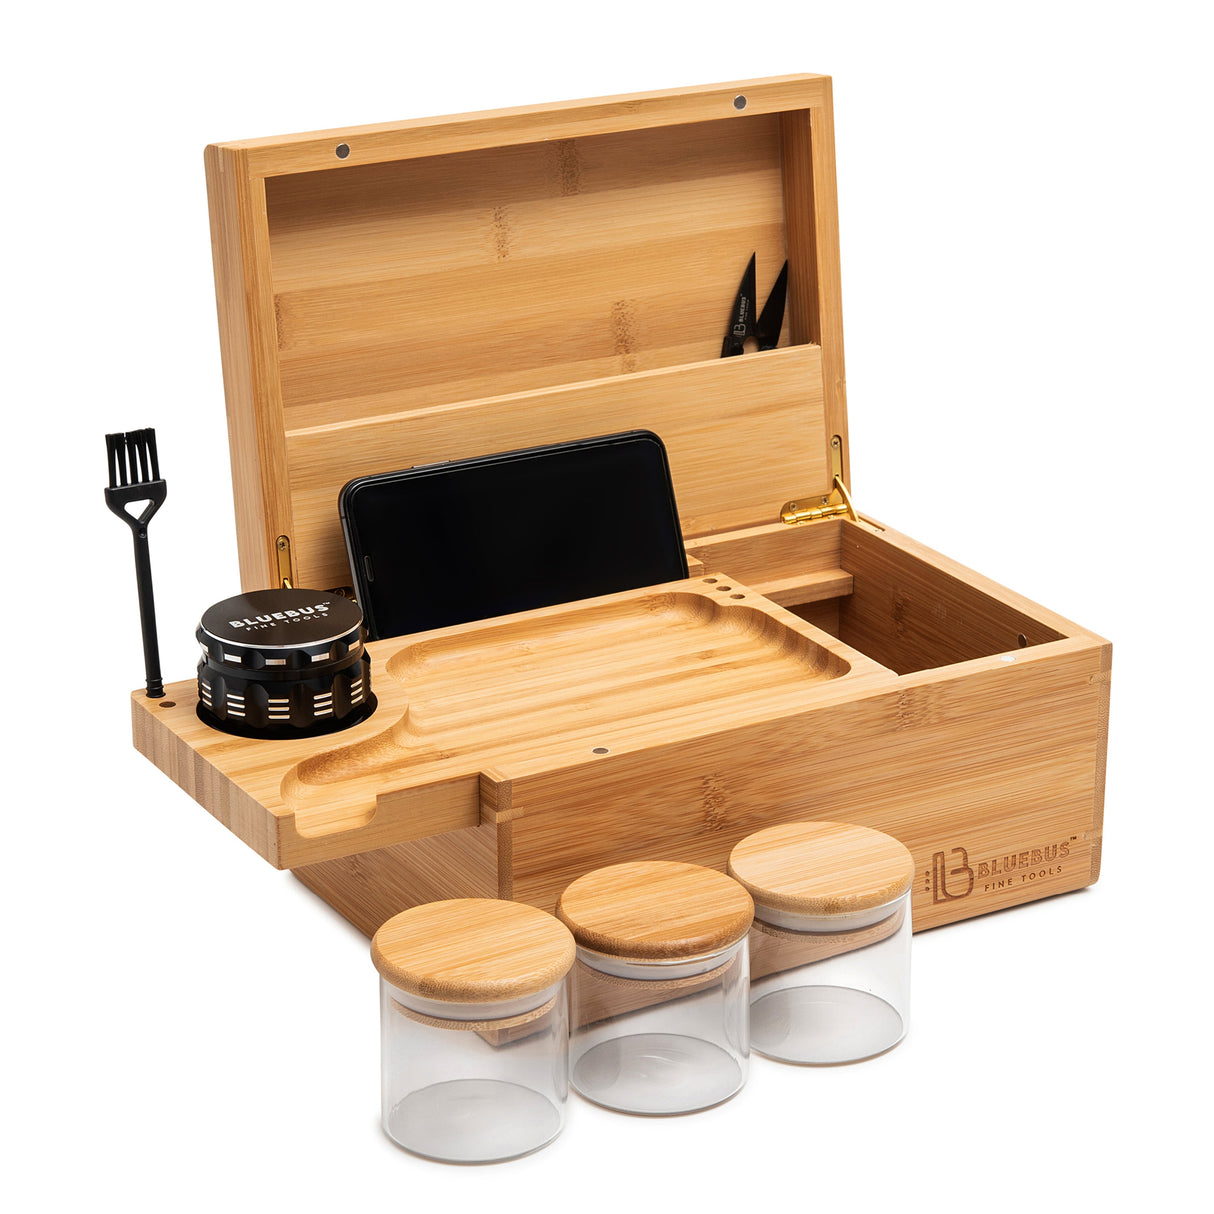 GENESIS storage stash box by Blue Bus fine tools, open view showing compartments and accessories